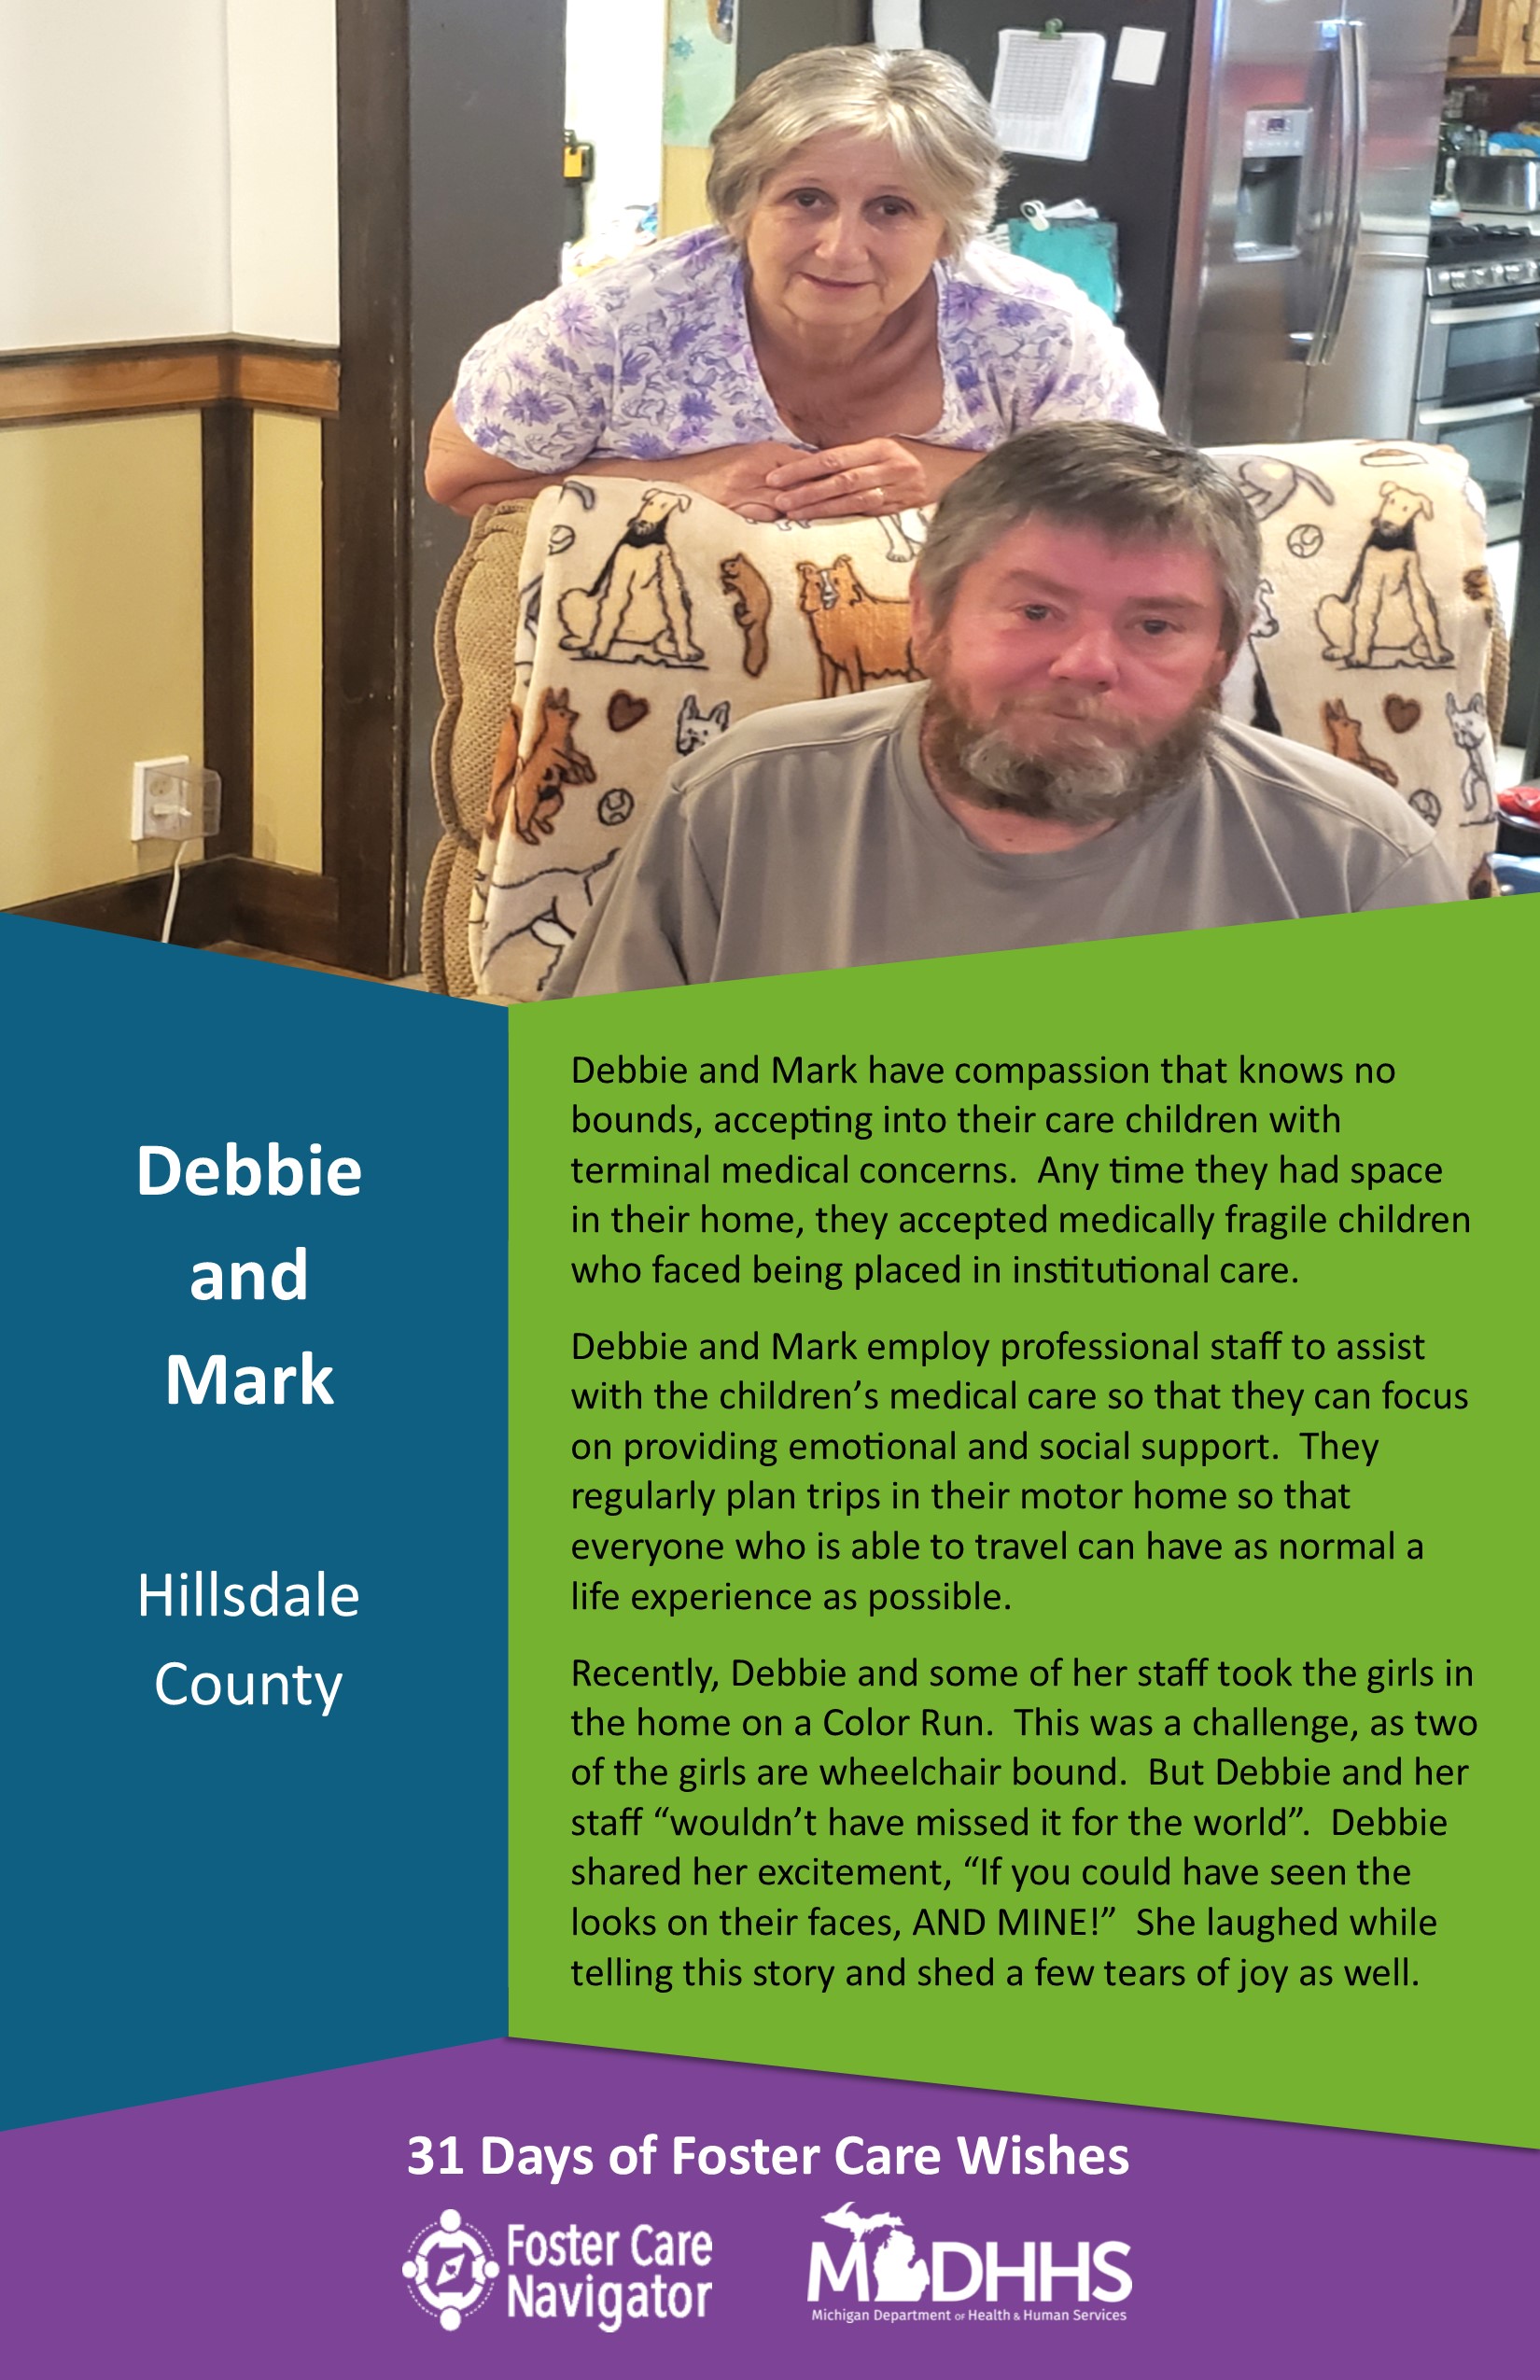 This full page feature includes all of the text listed in the body of this blog post as well as a photo of Debbie and Mark. The background is blue on the left, green on the right, and purple at the bottom of the page where the logos are located.